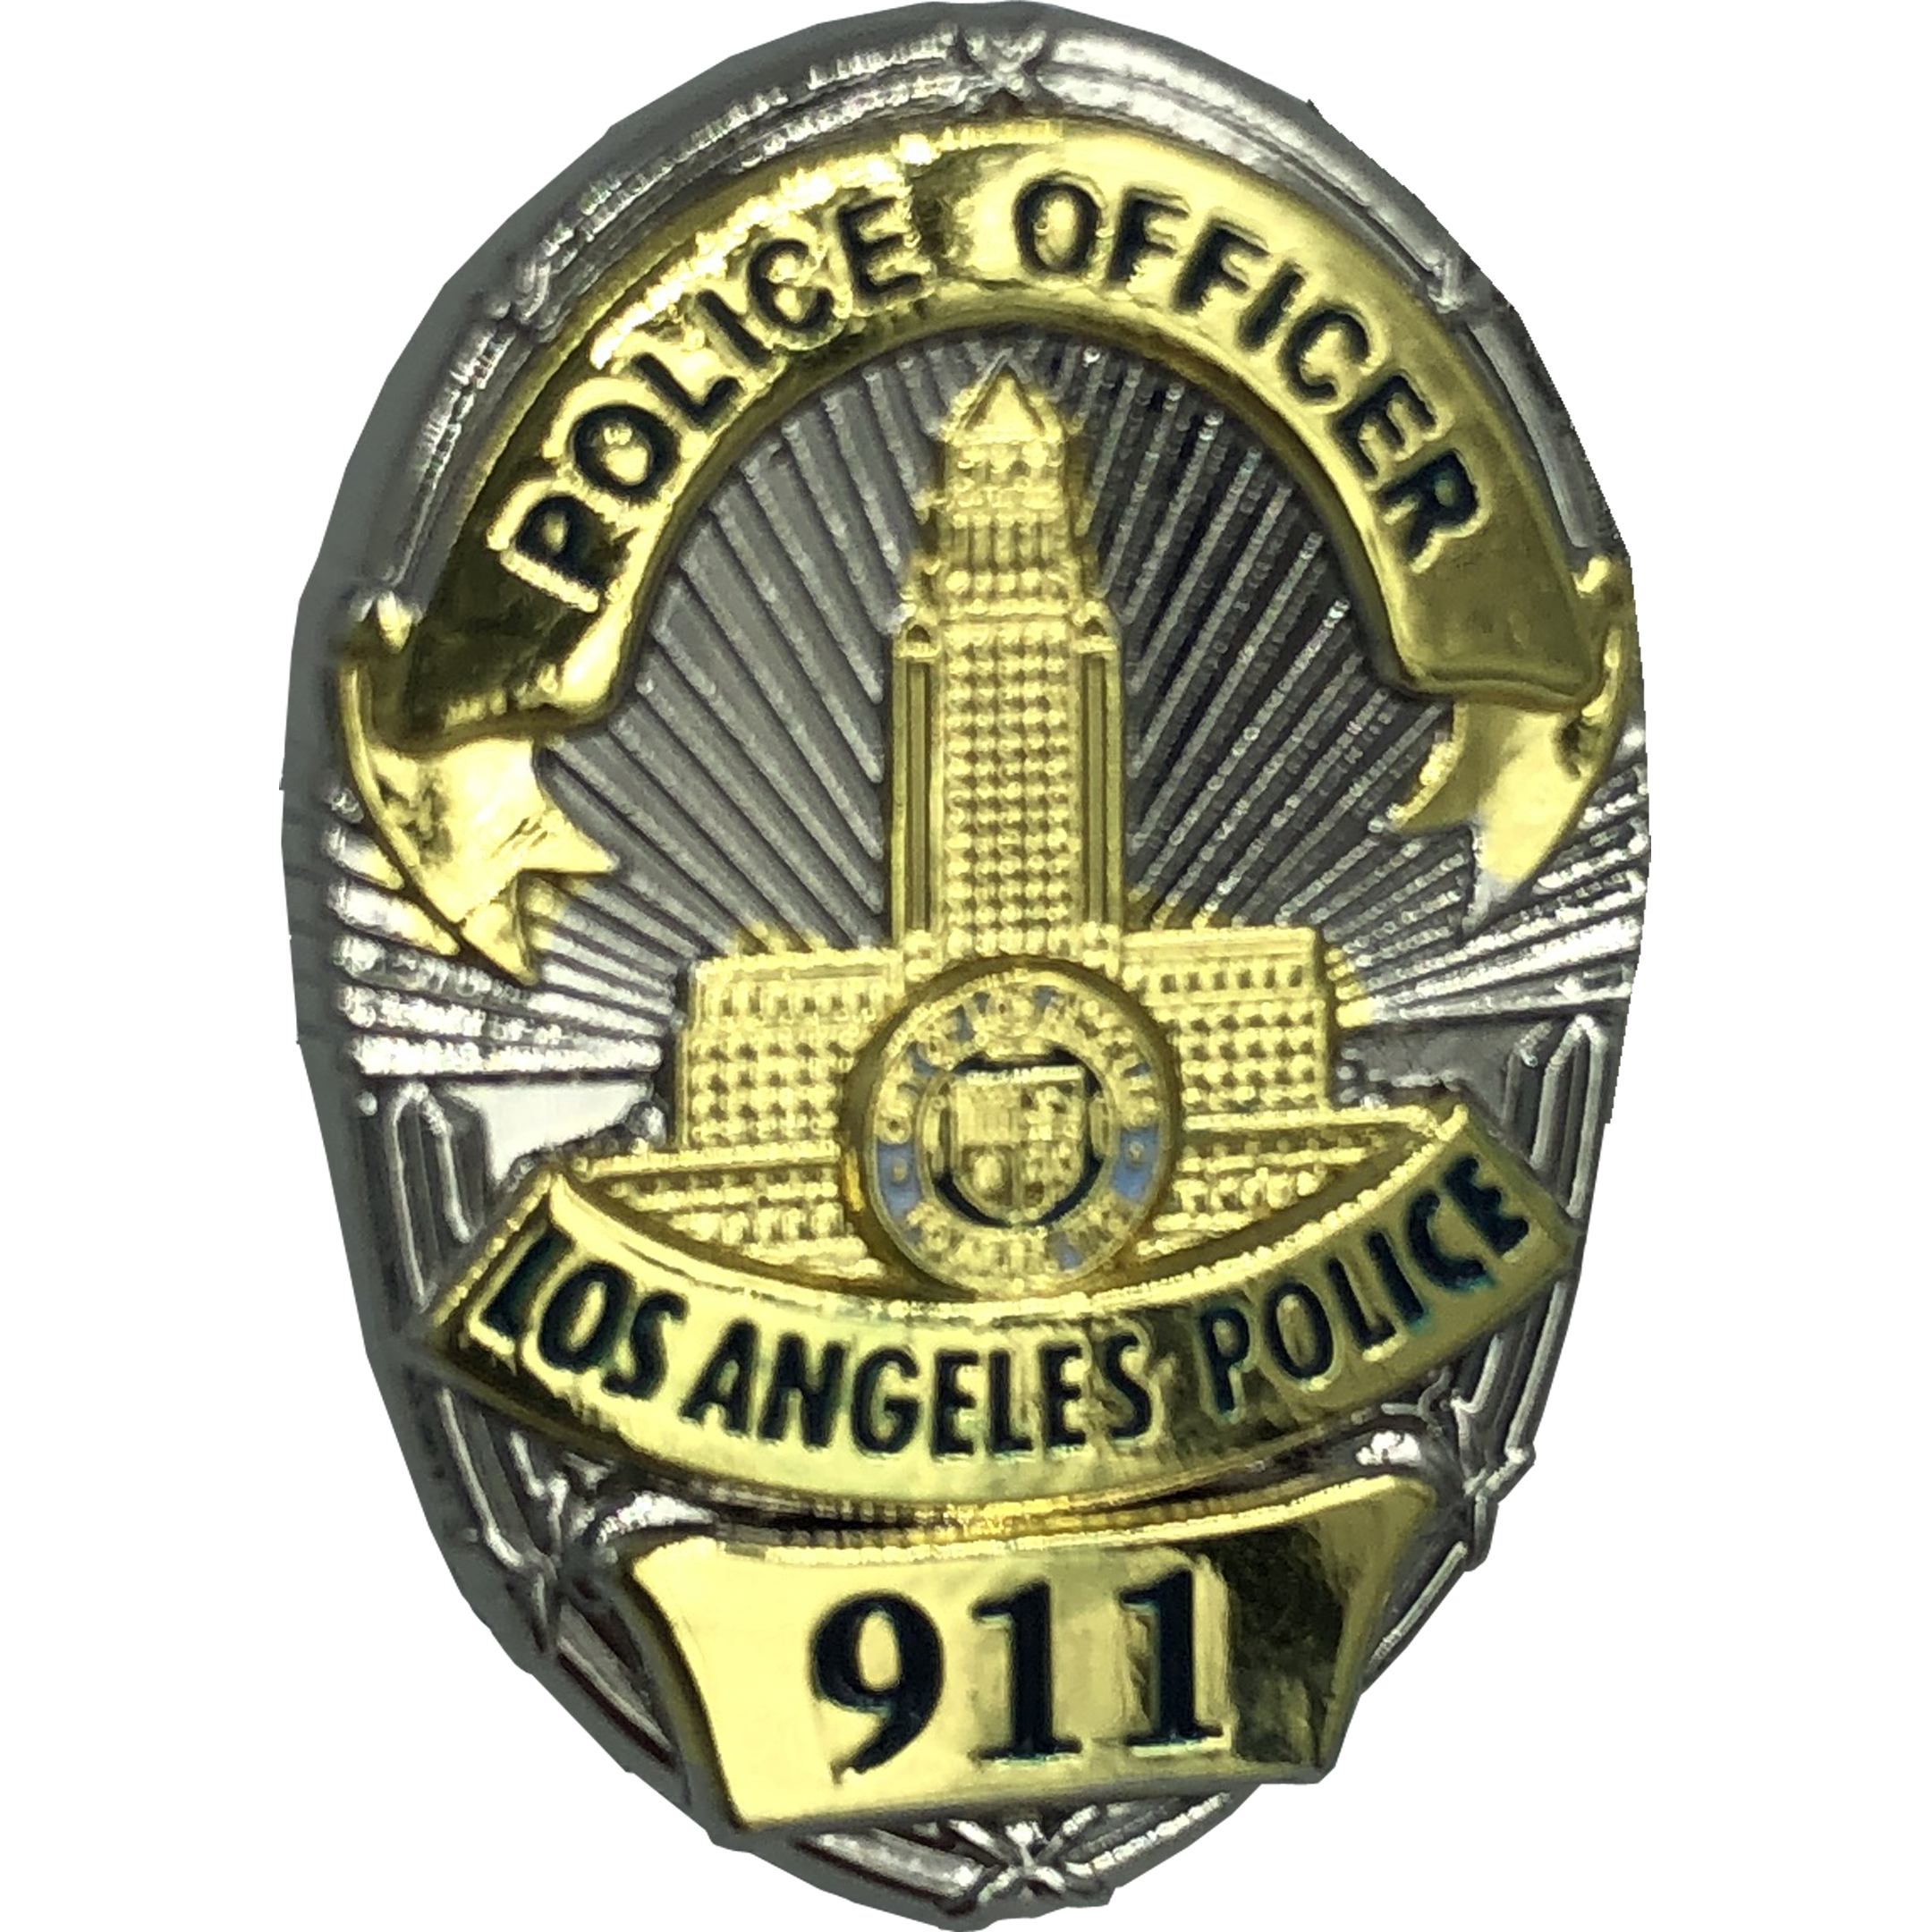 HH-015 LAPD Officer shield lapel Pin double plated with deluxe spring loaded clasp Los Angeles Police Department